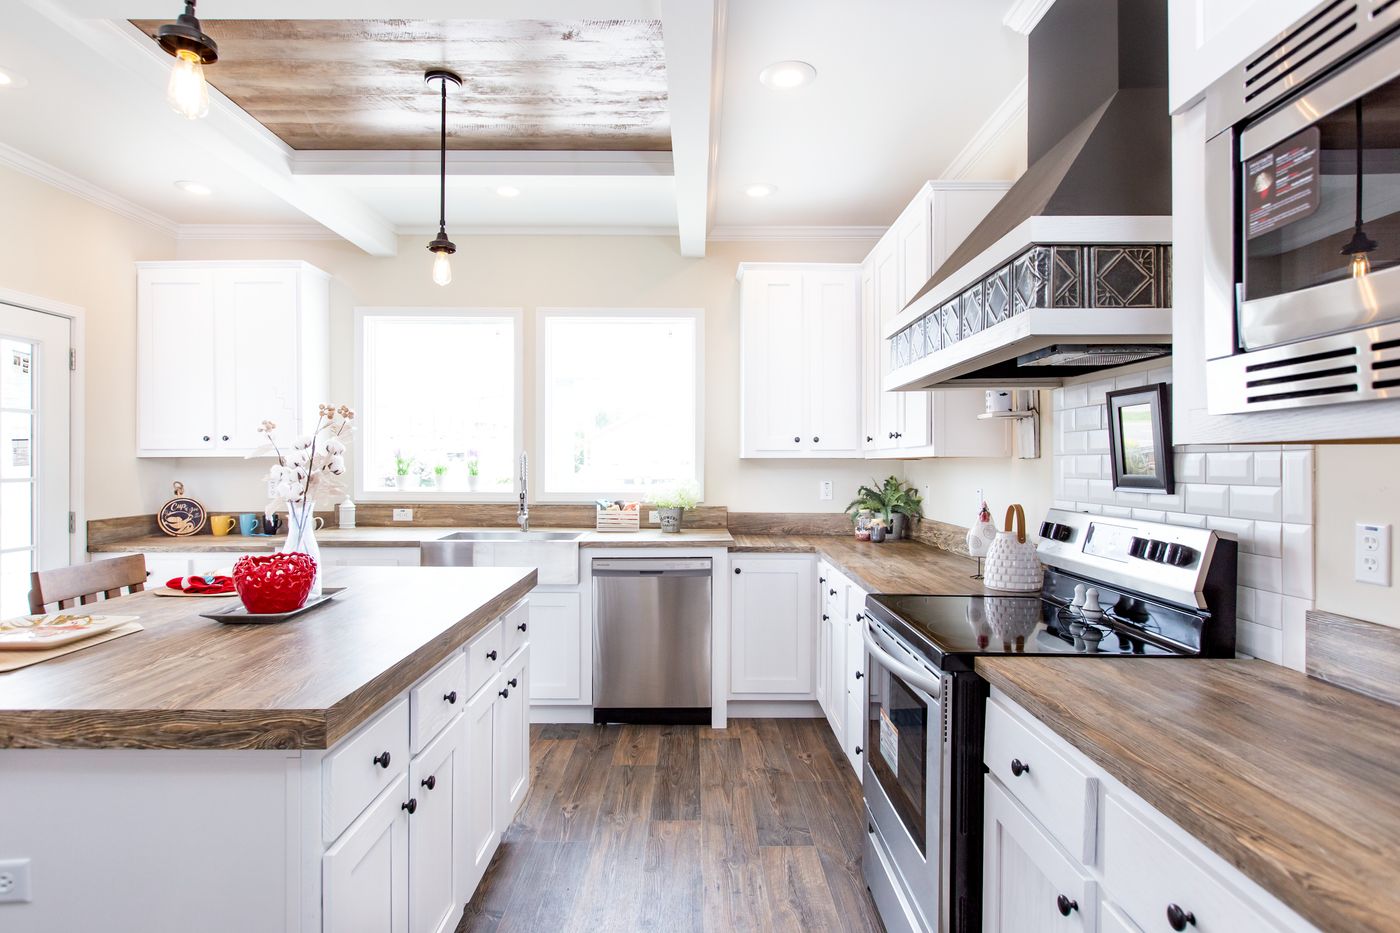 The SOUTHERN CHARM Kitchen. This Manufactured Mobile Home features 3 bedrooms and 2 baths.